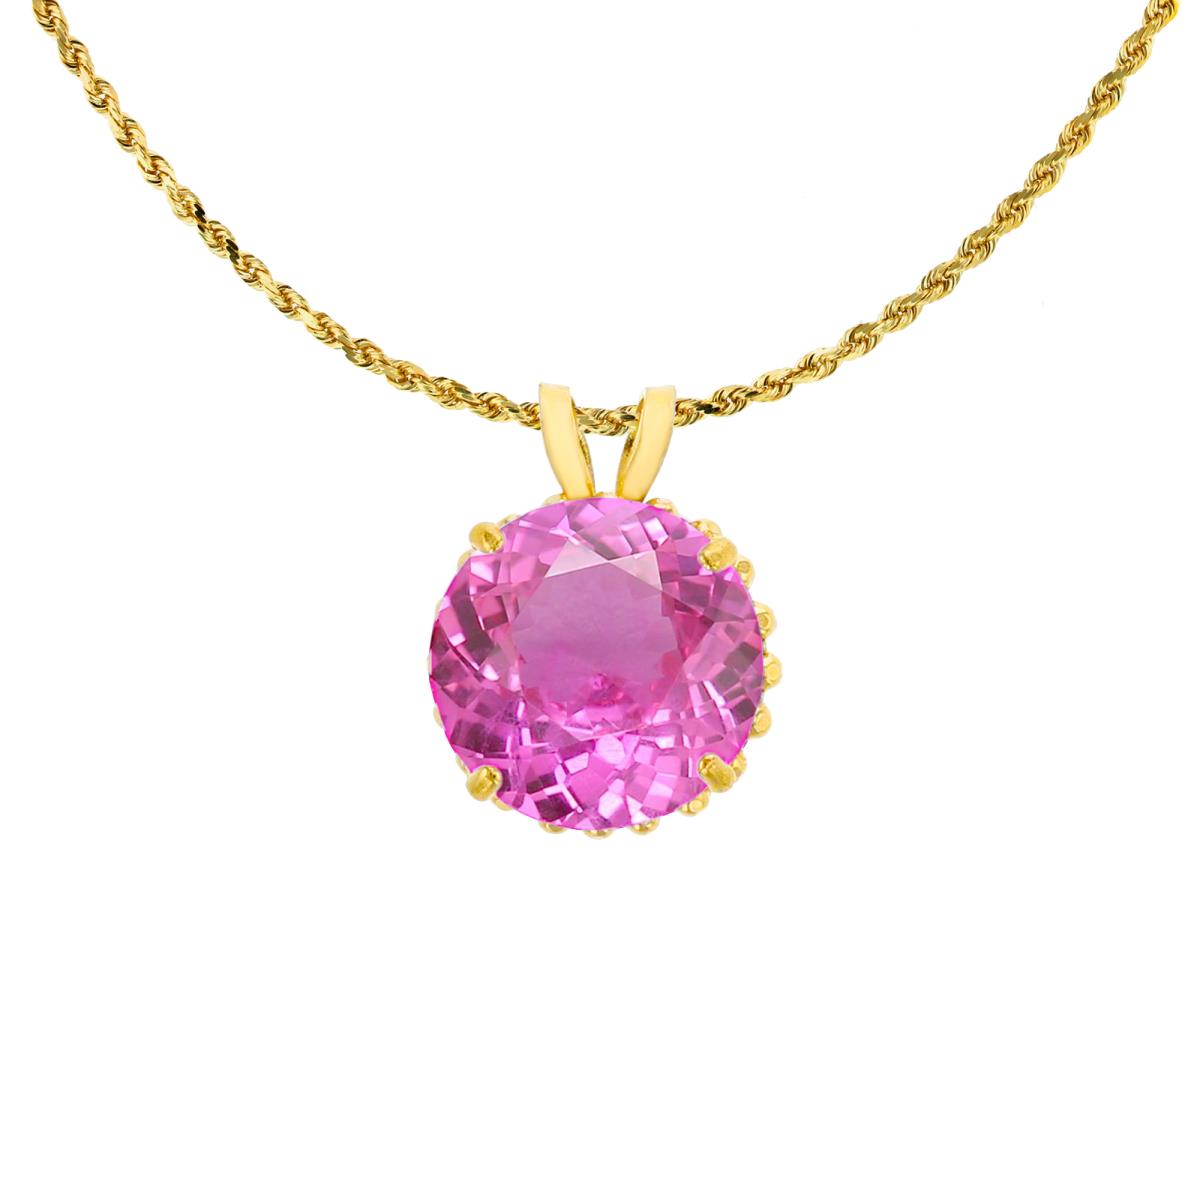 14K Yellow Gold 7mm Rd Cut Created Pink Sapphire with Bead Frame Rabbit Ear 18" Rope Chain Necklace